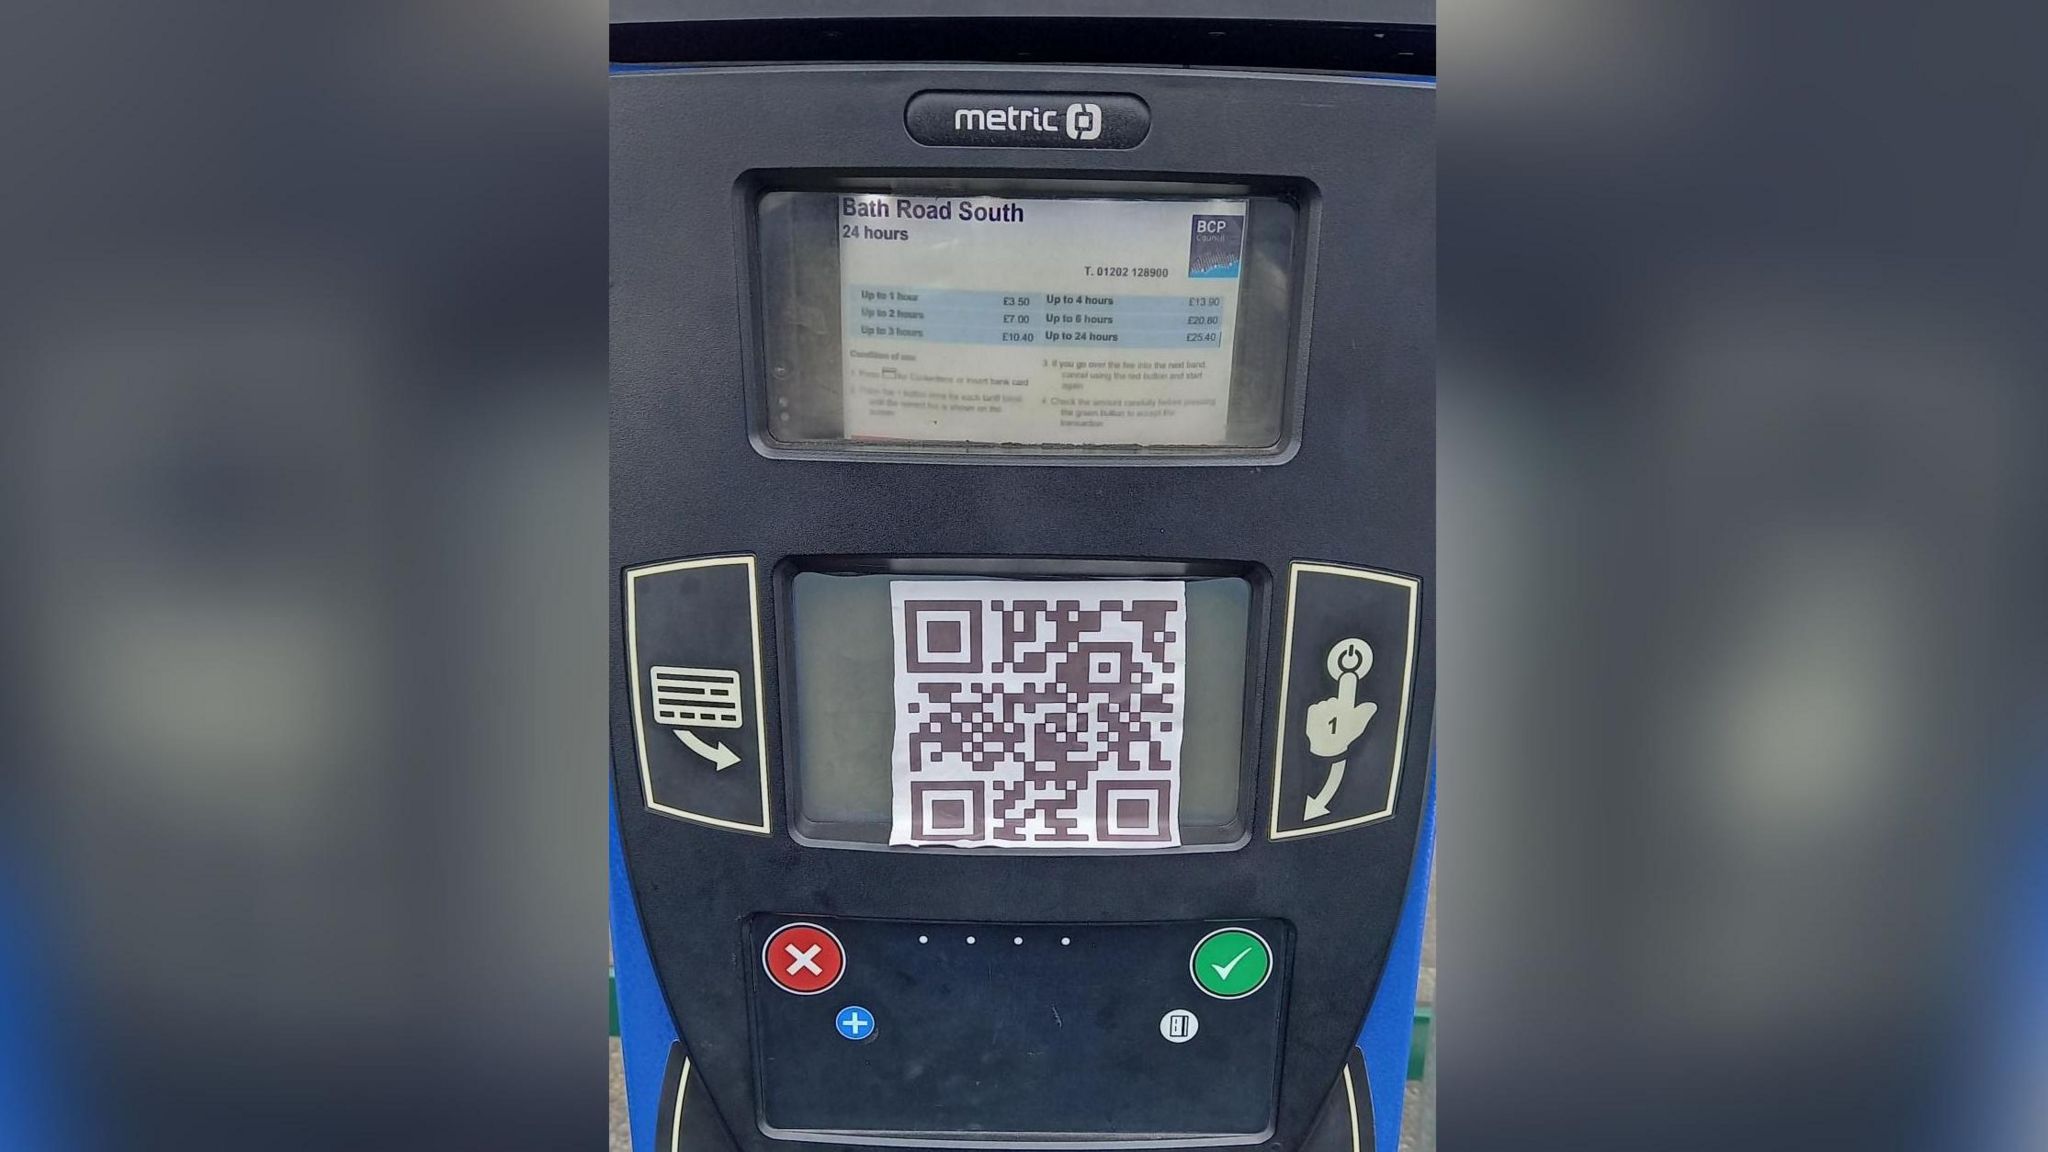 a parking machine with a large QR code stuck on it. The machine reads 'Bath Road South'.